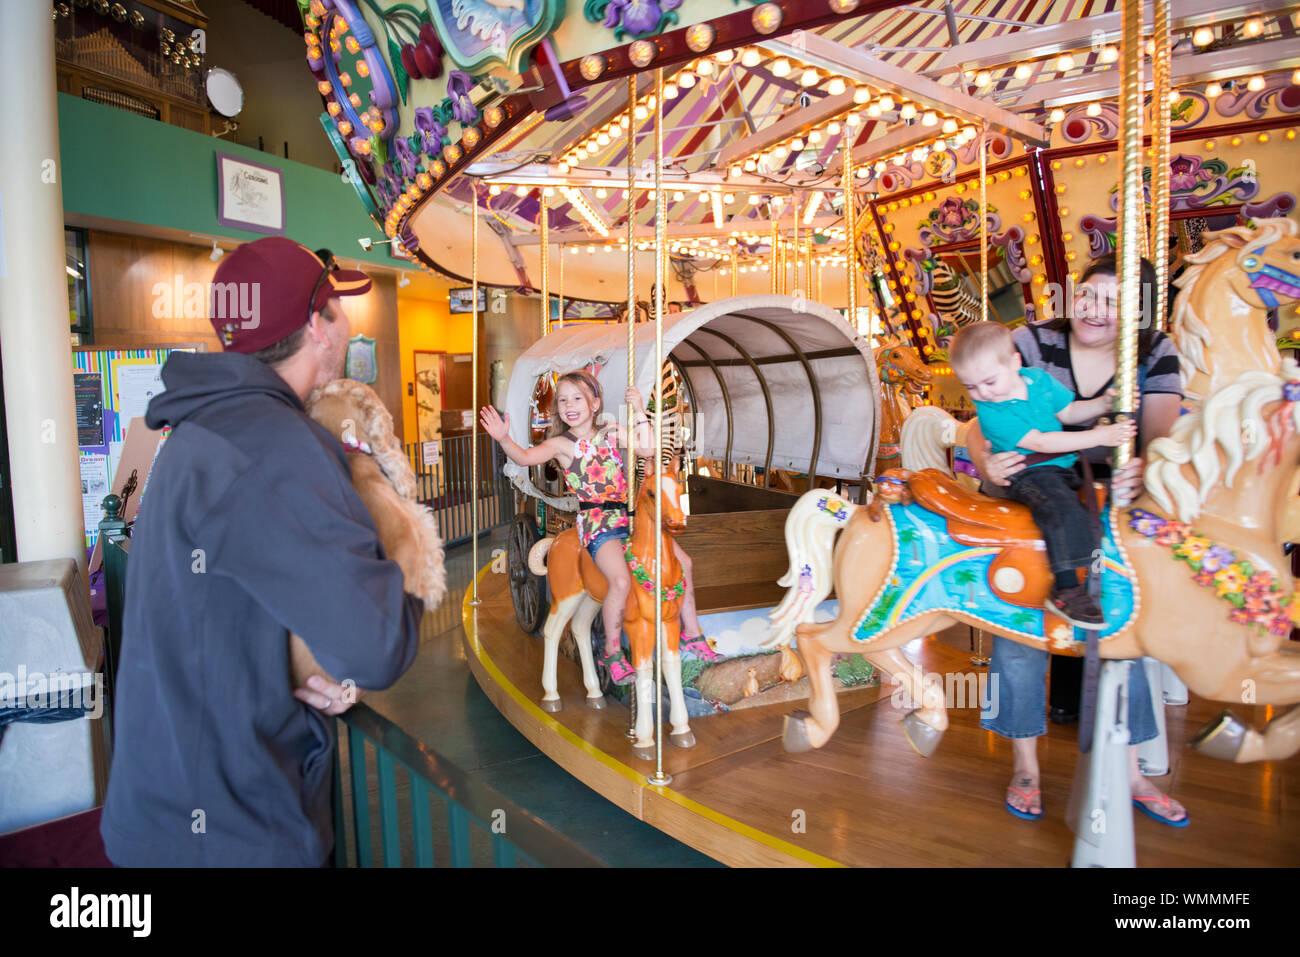 The Riverfront Carousel is located in Riverfront Park in Salem, Oregon. The hand-carved and painted animals on the carousel are made by volunteers. Stock Photo